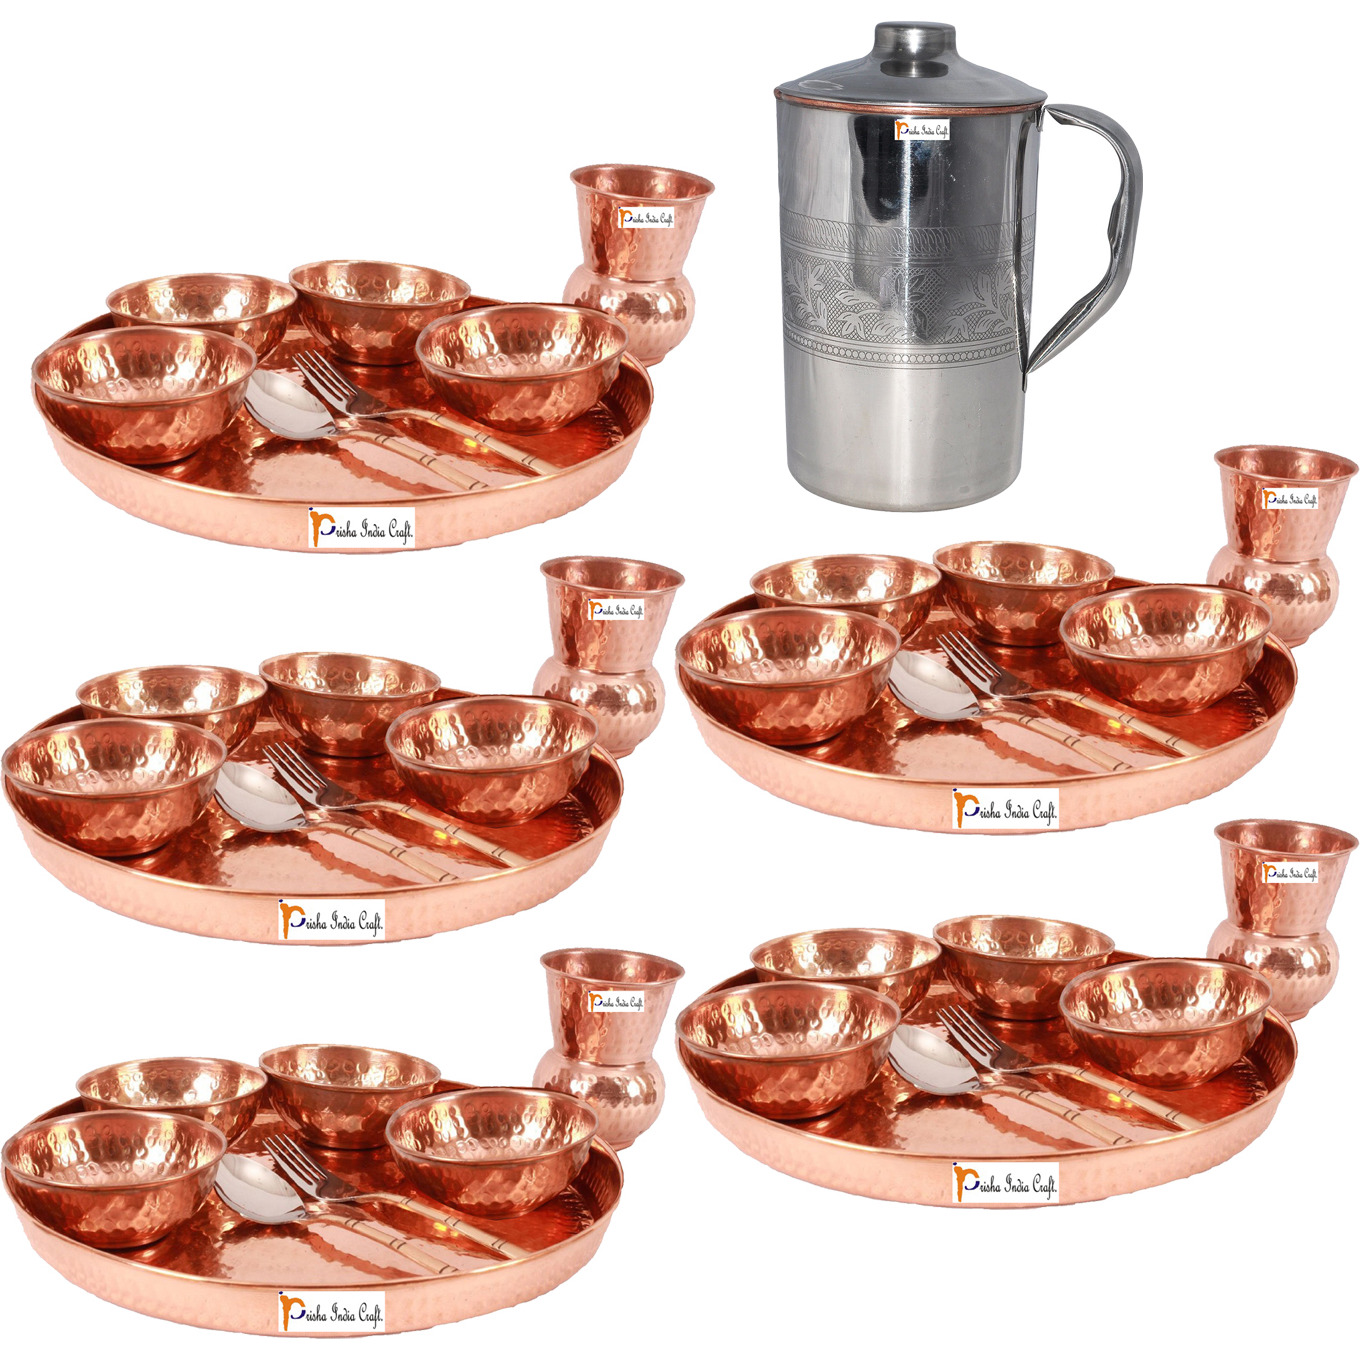 Prisha India Craft B. Set of 5 Dinnerware Traditional 100% Pure Copper Dinner Set of Thali Plate, Bowls, Glass and Spoon, Dia 12  With 1 Embossed Stainless Steel Copper Pitcher Jug - Christmas Gift